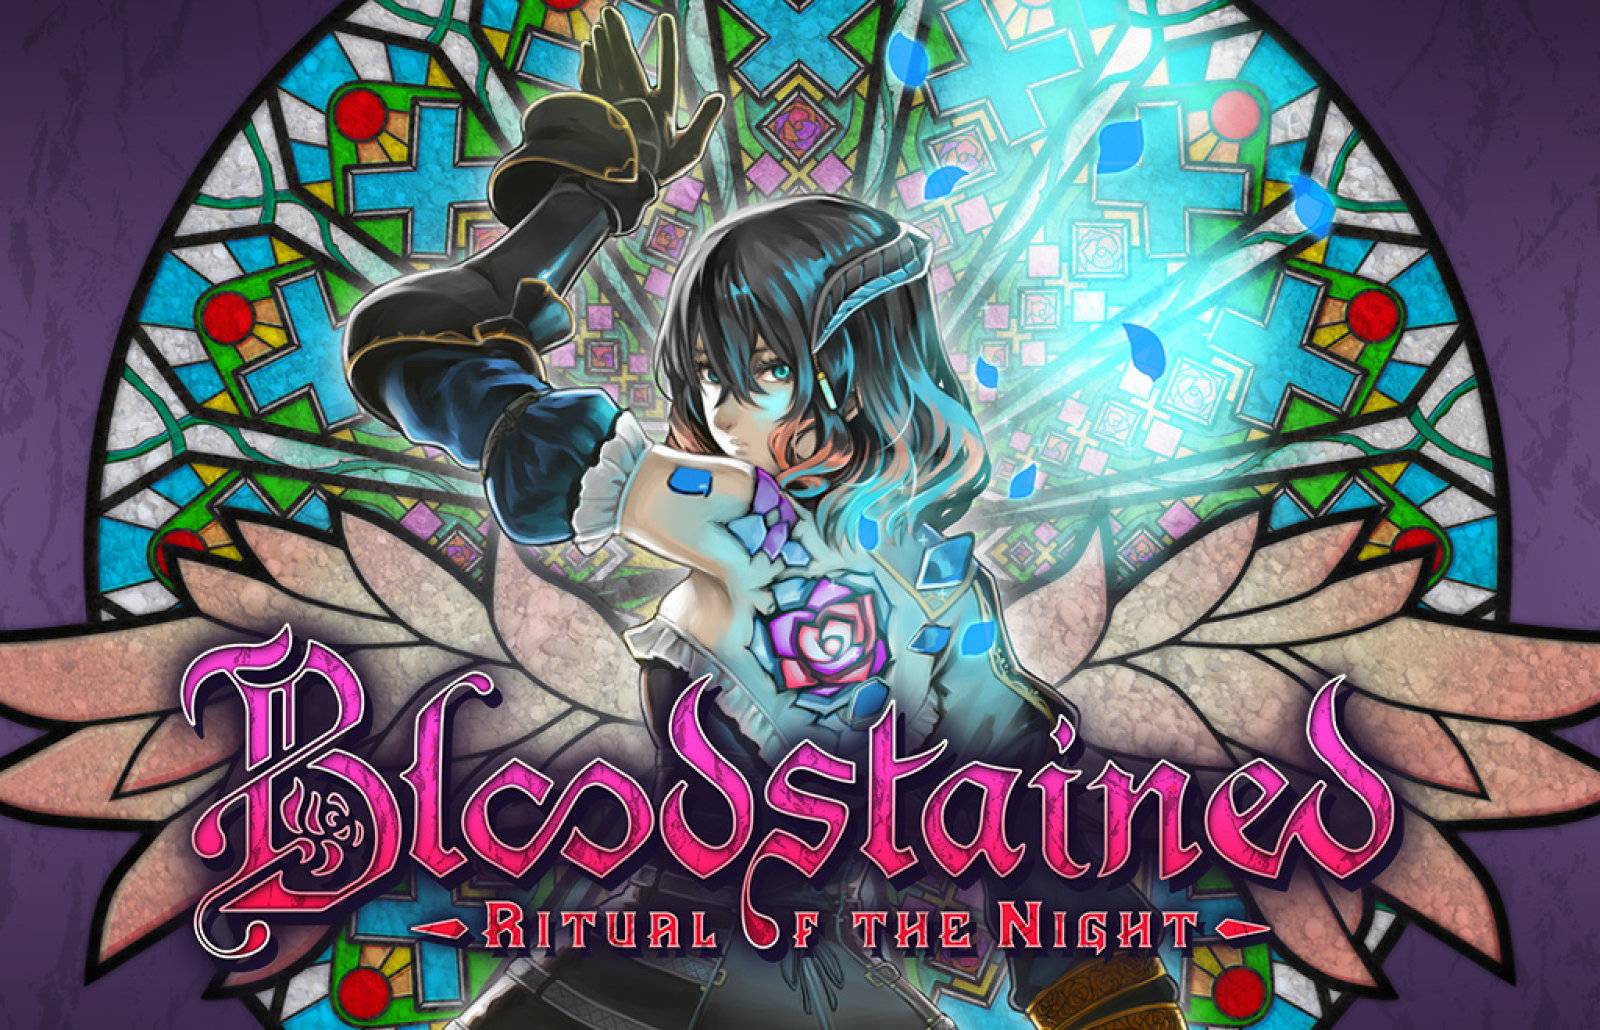 Bloodstained: Ritual of the Night is coming out on June 18th